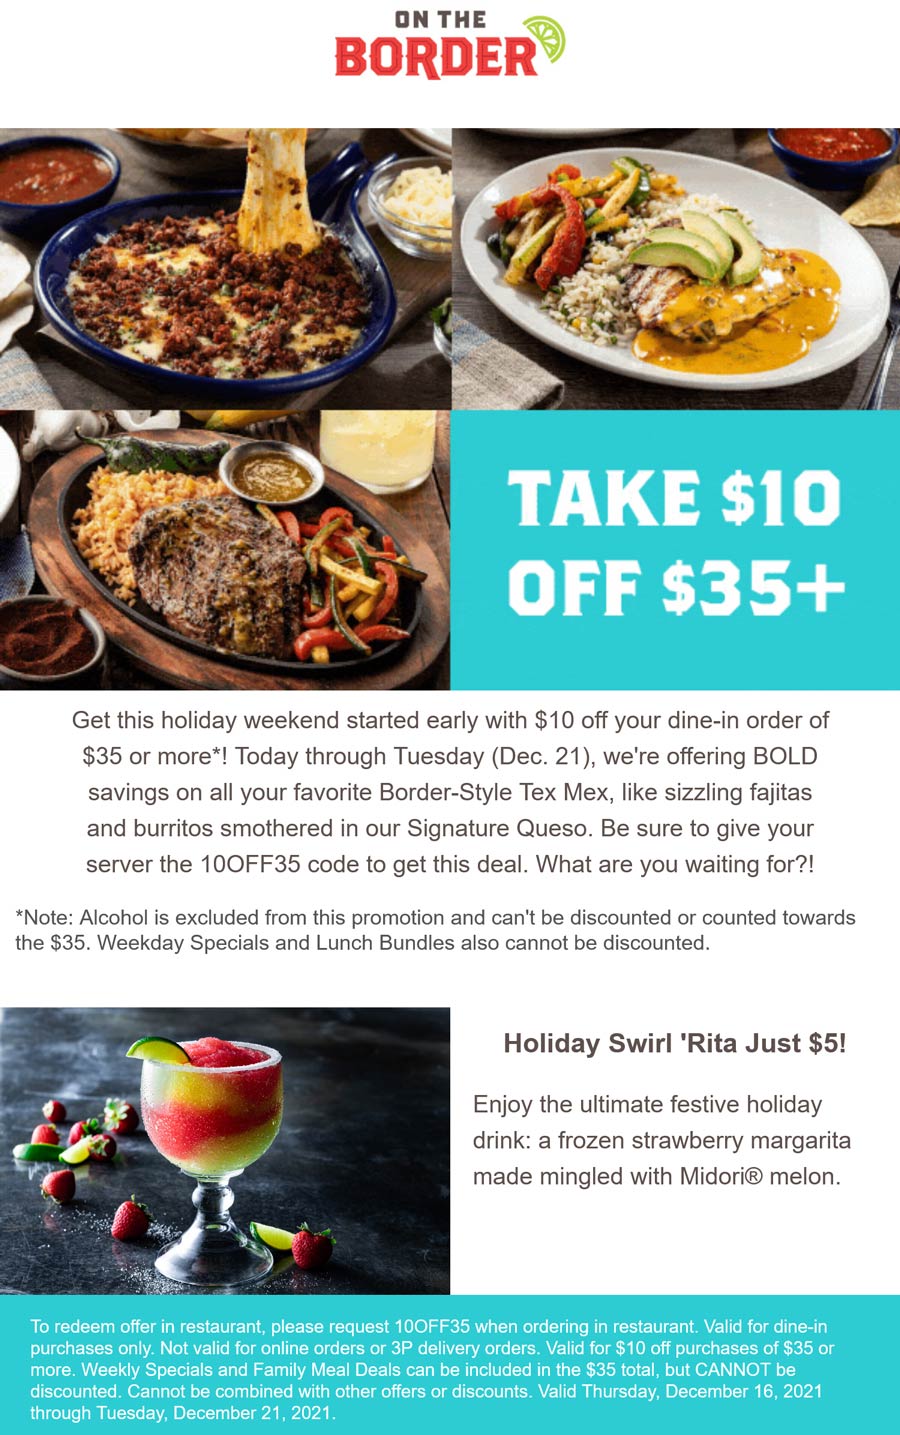 On The Border restaurants Coupon  $10 off $35 at On The Border restaurants via promo code 10OFF35 #ontheborder 